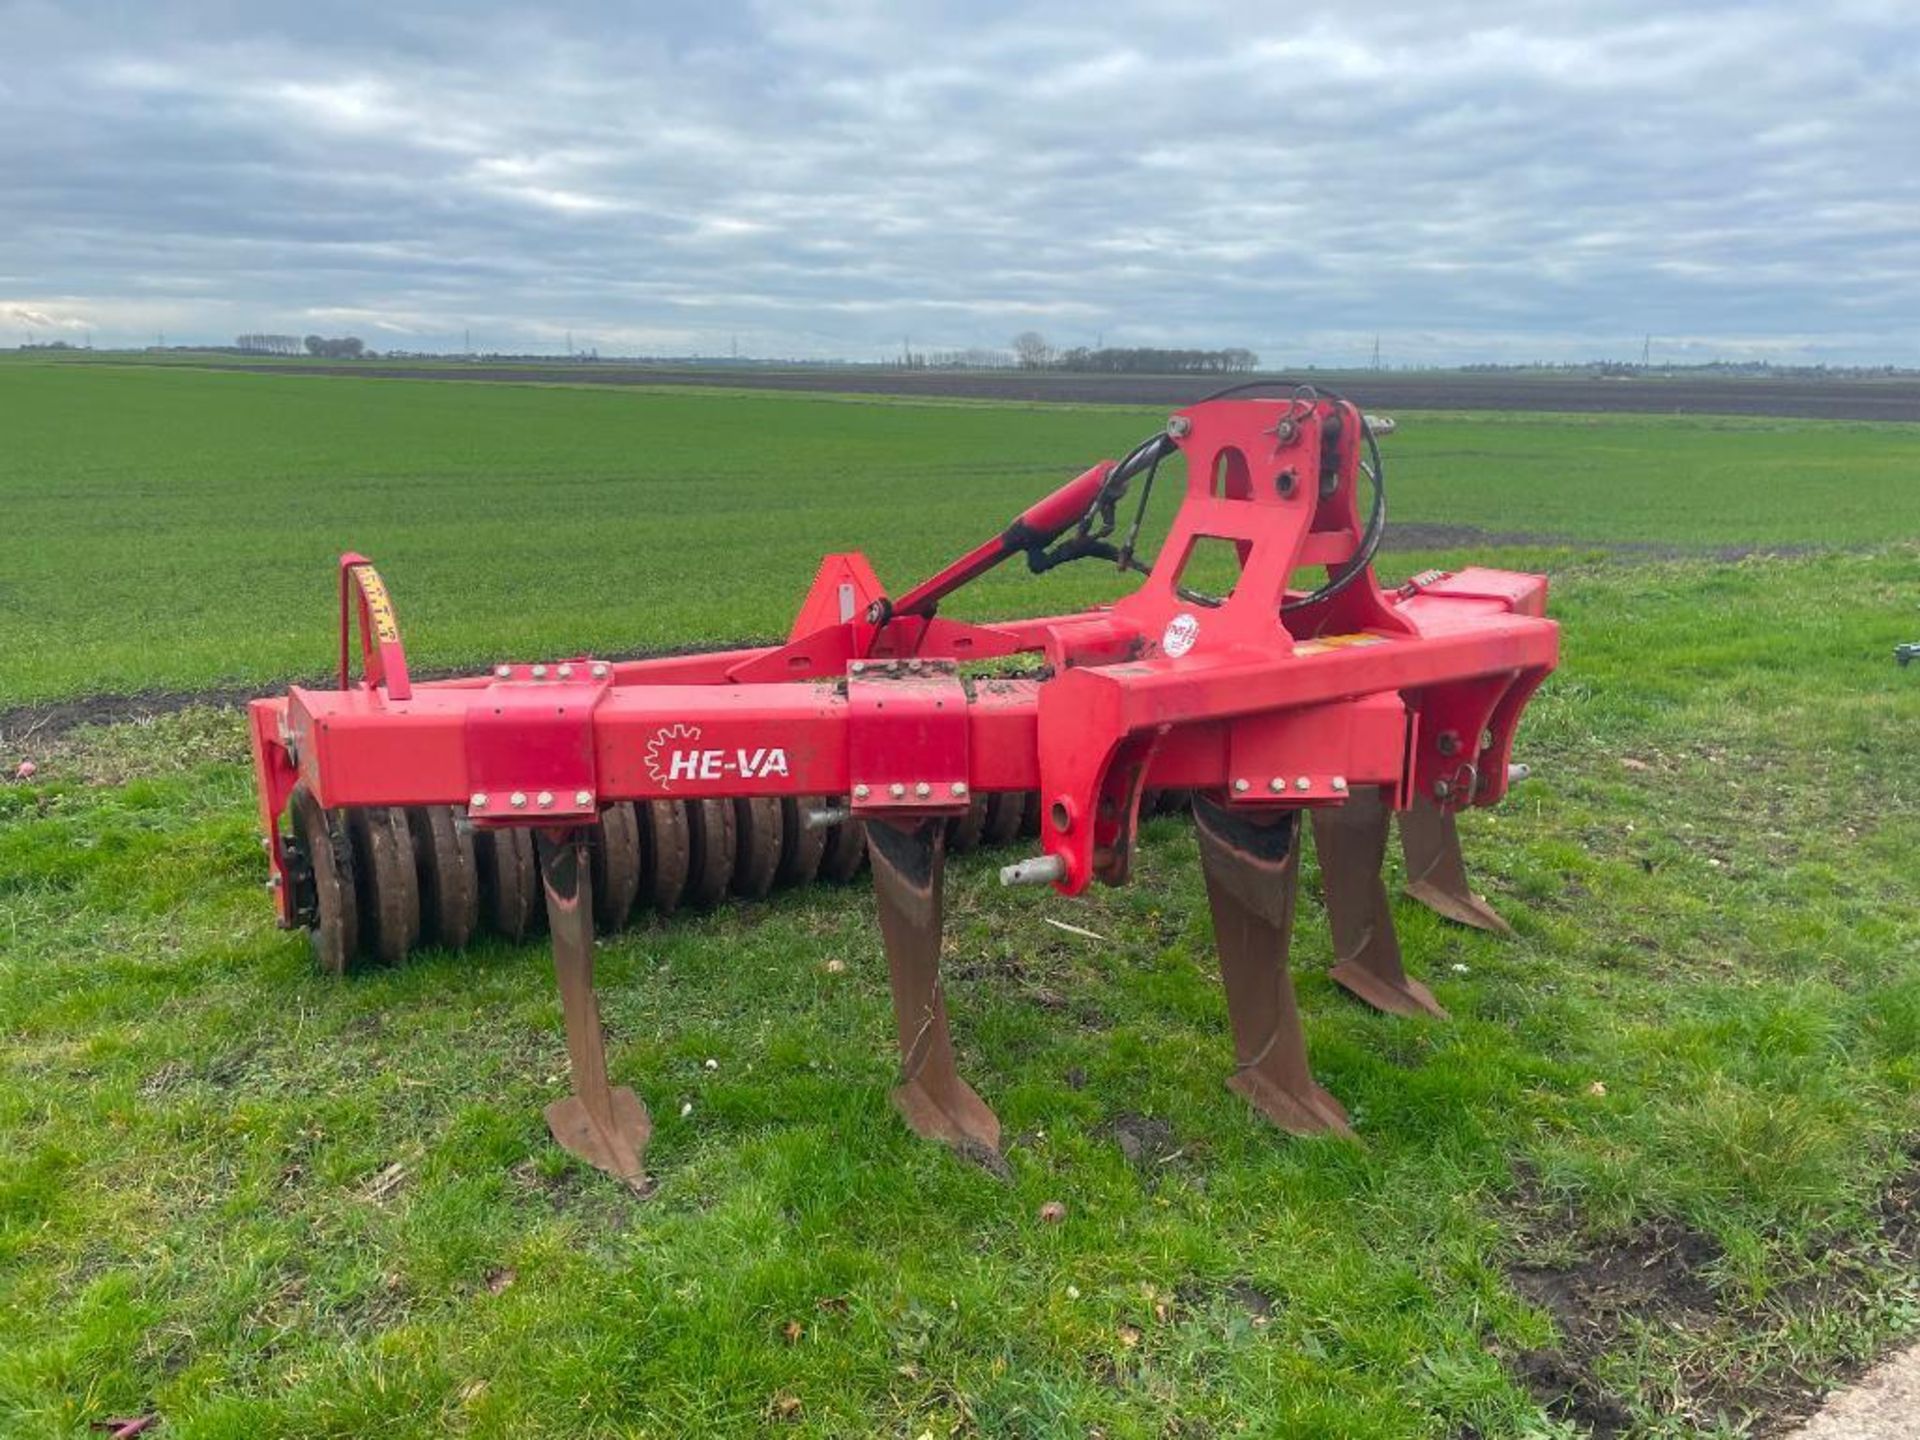 2014 HE-VA 5 leg subsoiler with hydraulic adjustable rear packer. Serial No: 30527 ​​​​​​​Manual in - Image 3 of 14